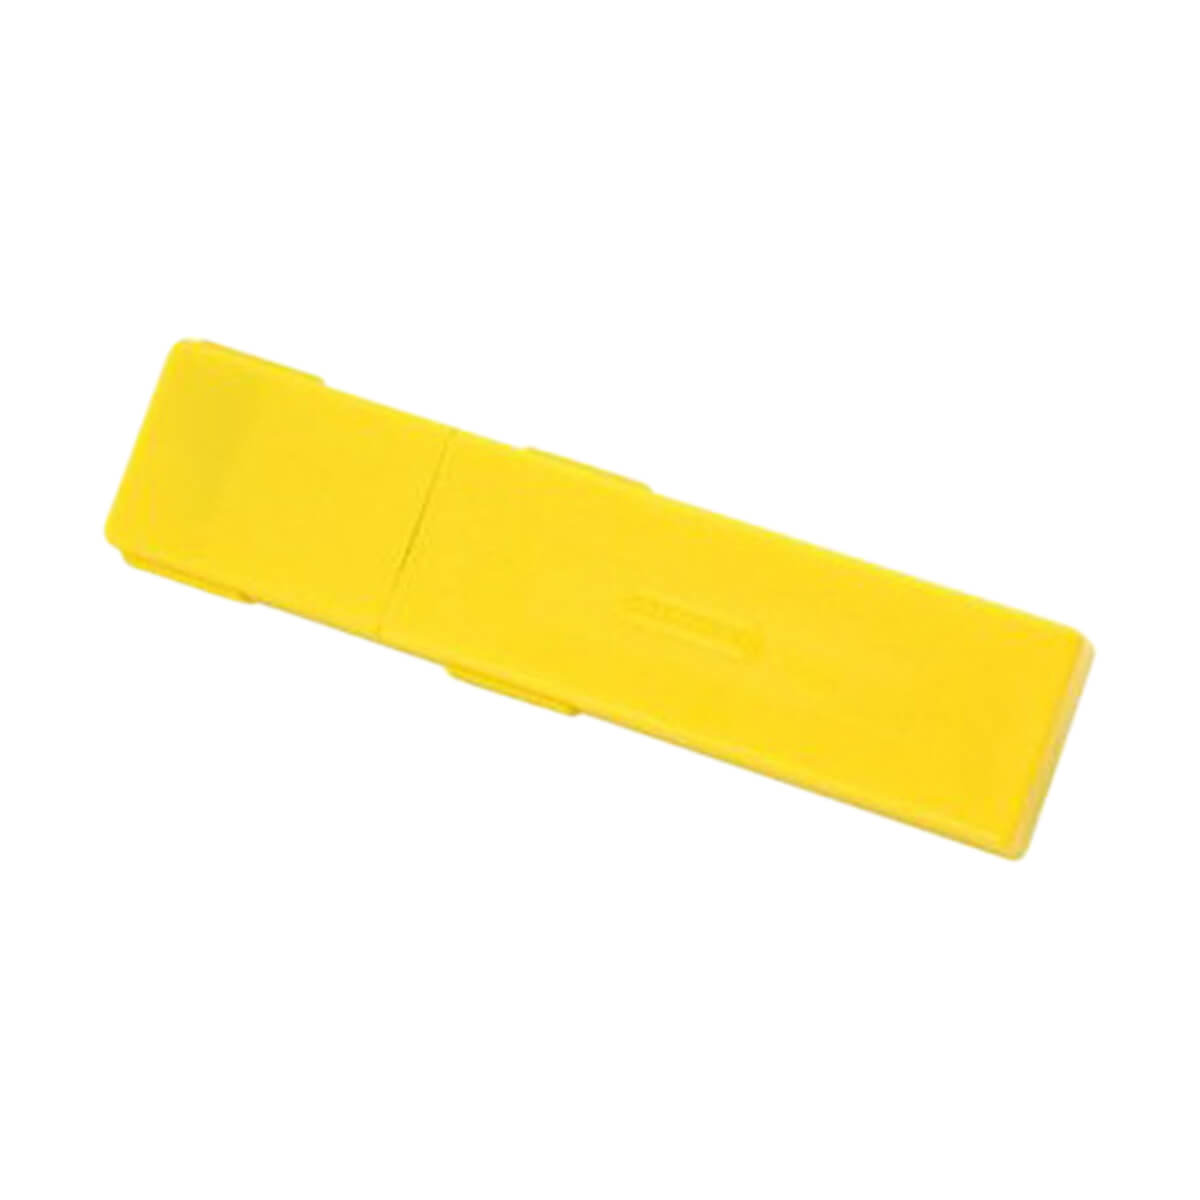 Stanley Super Heavy Duty Quick-Point Blade - 25 mm - 10 Pack